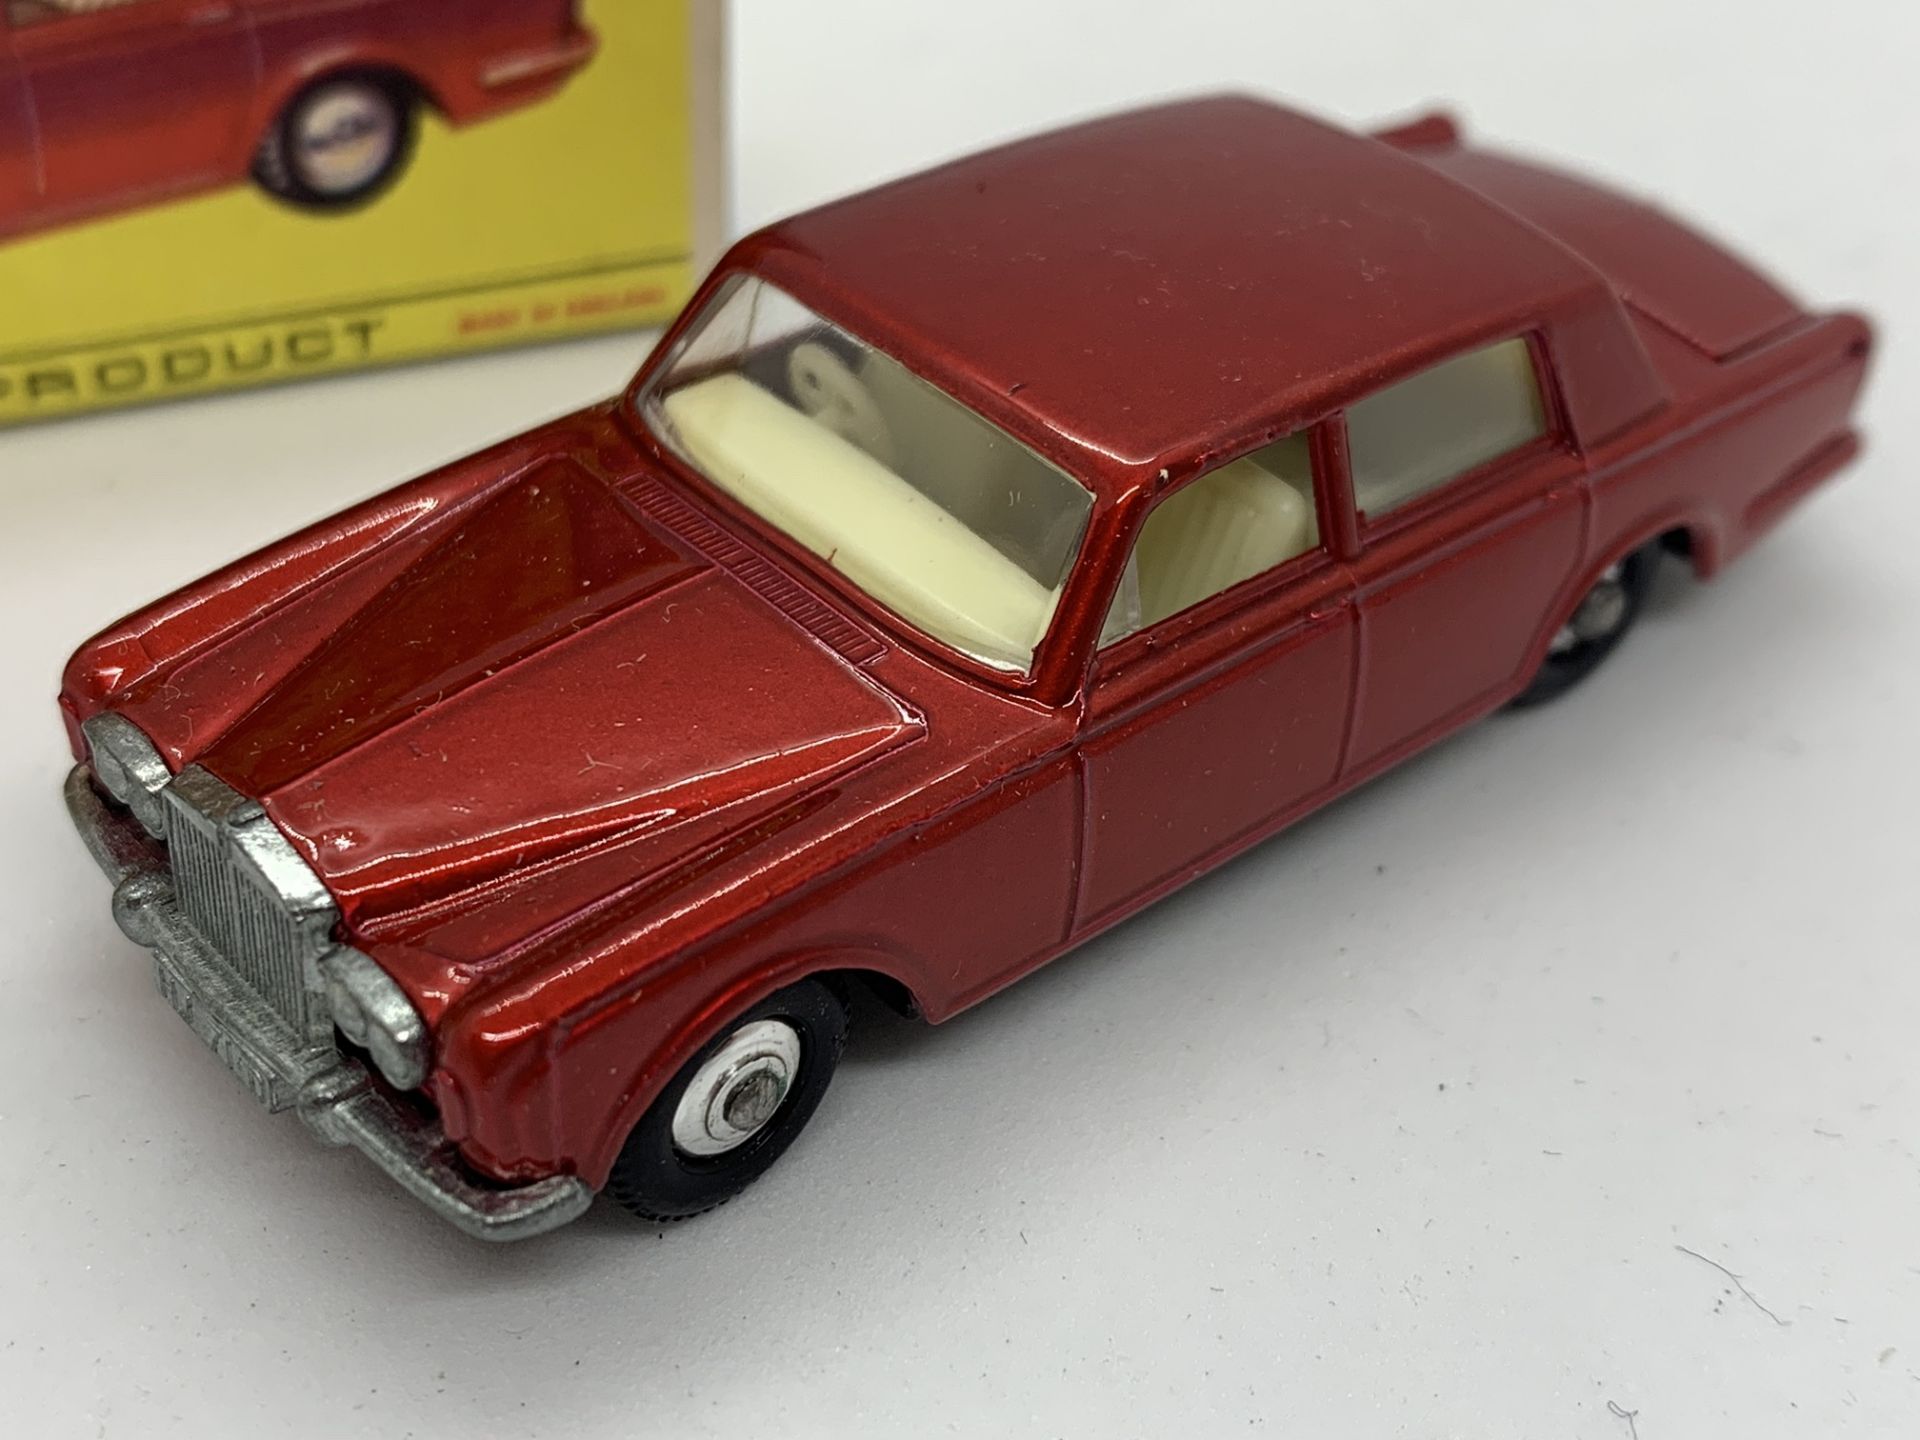 MATCHBOX ROLLS ROYCE SILVER SHADOW NO 24 WITH ORIGINAL BOX - NO RESERVE - Image 2 of 4